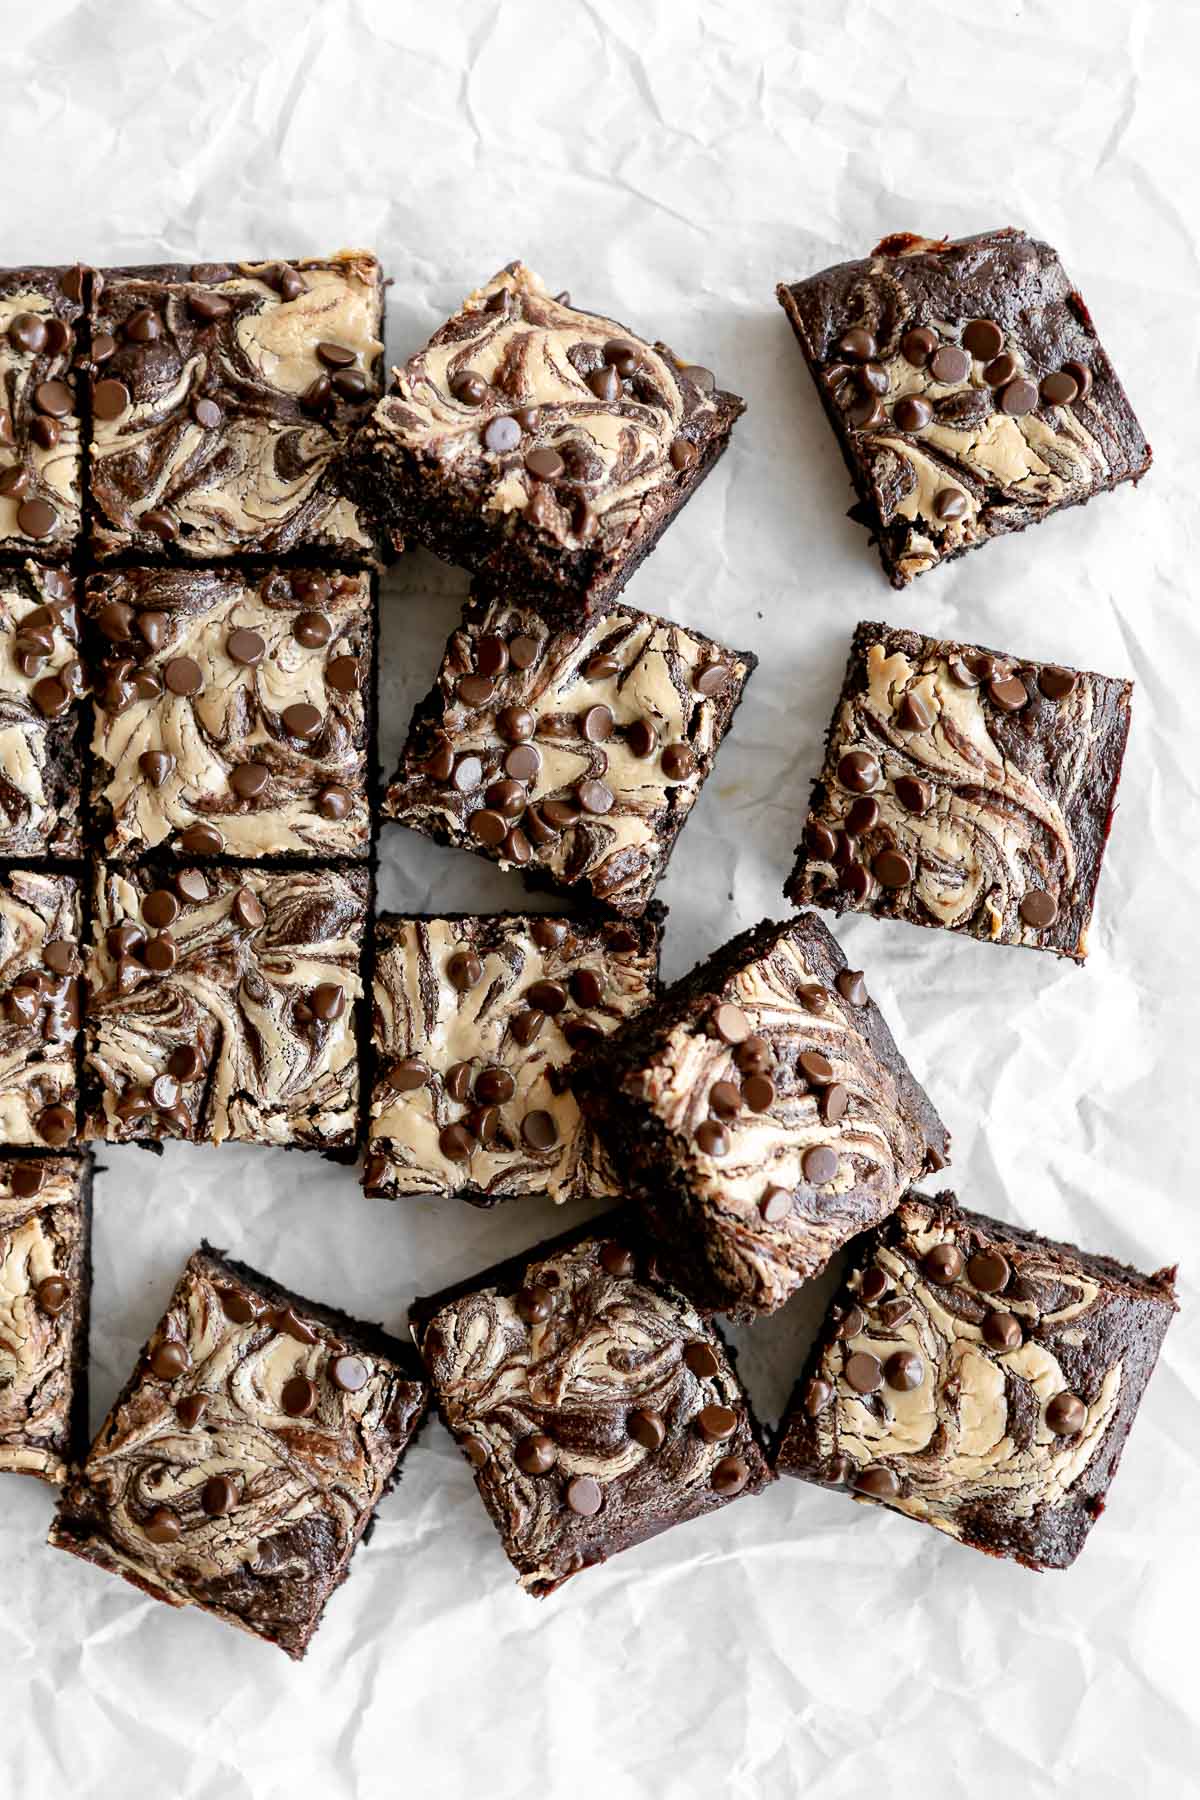 tahini brownies on parchment paper sliced into squares with chocolate chips